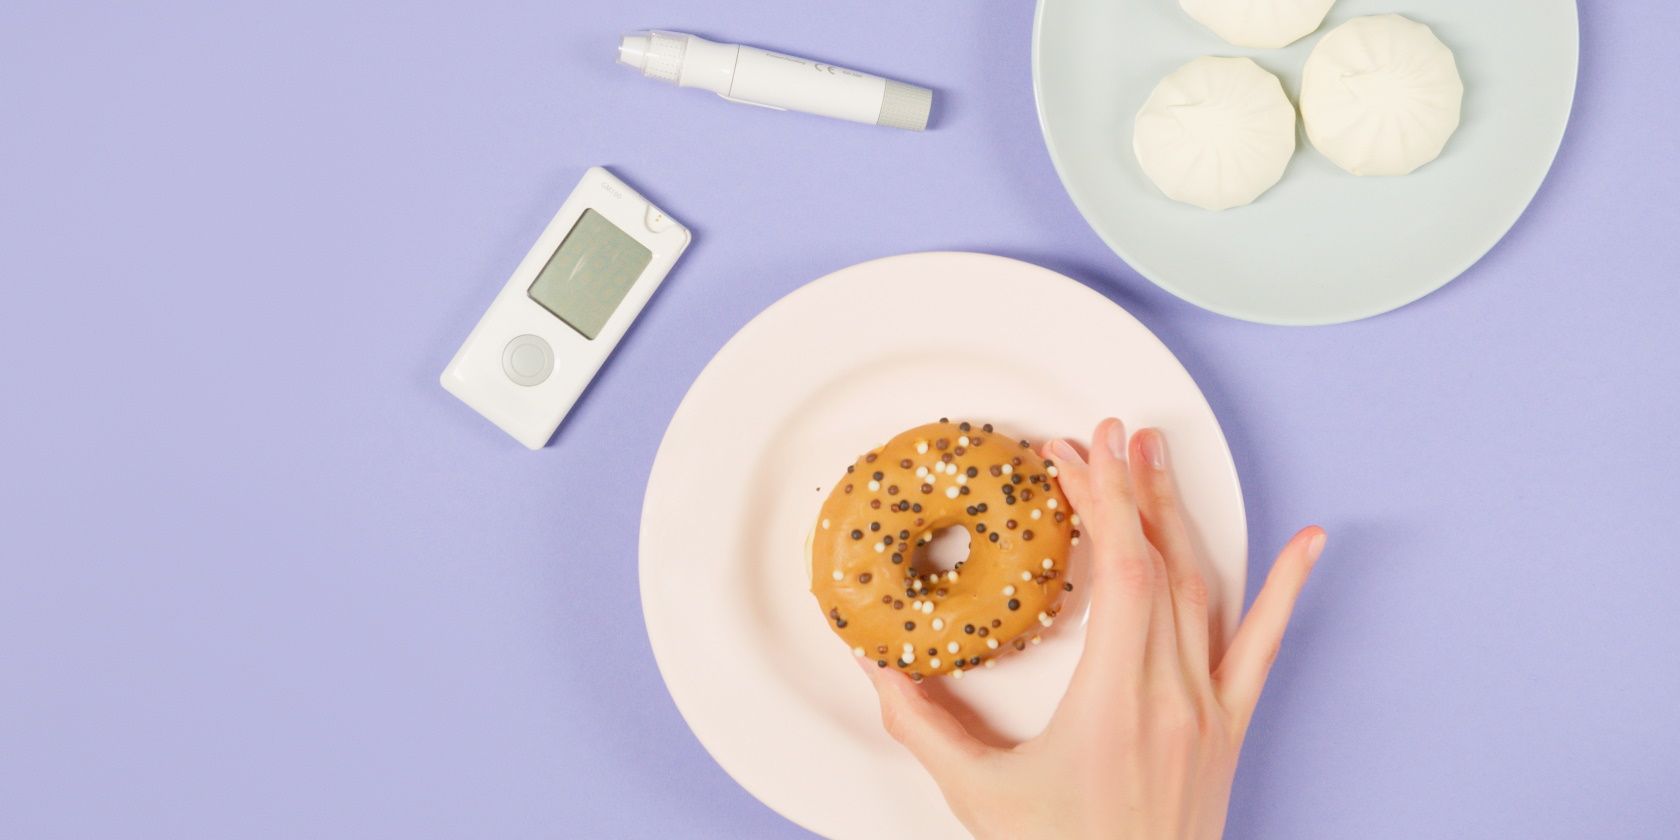 Glucose monitor, white bread on a plate, and hand holding a donut on a plate